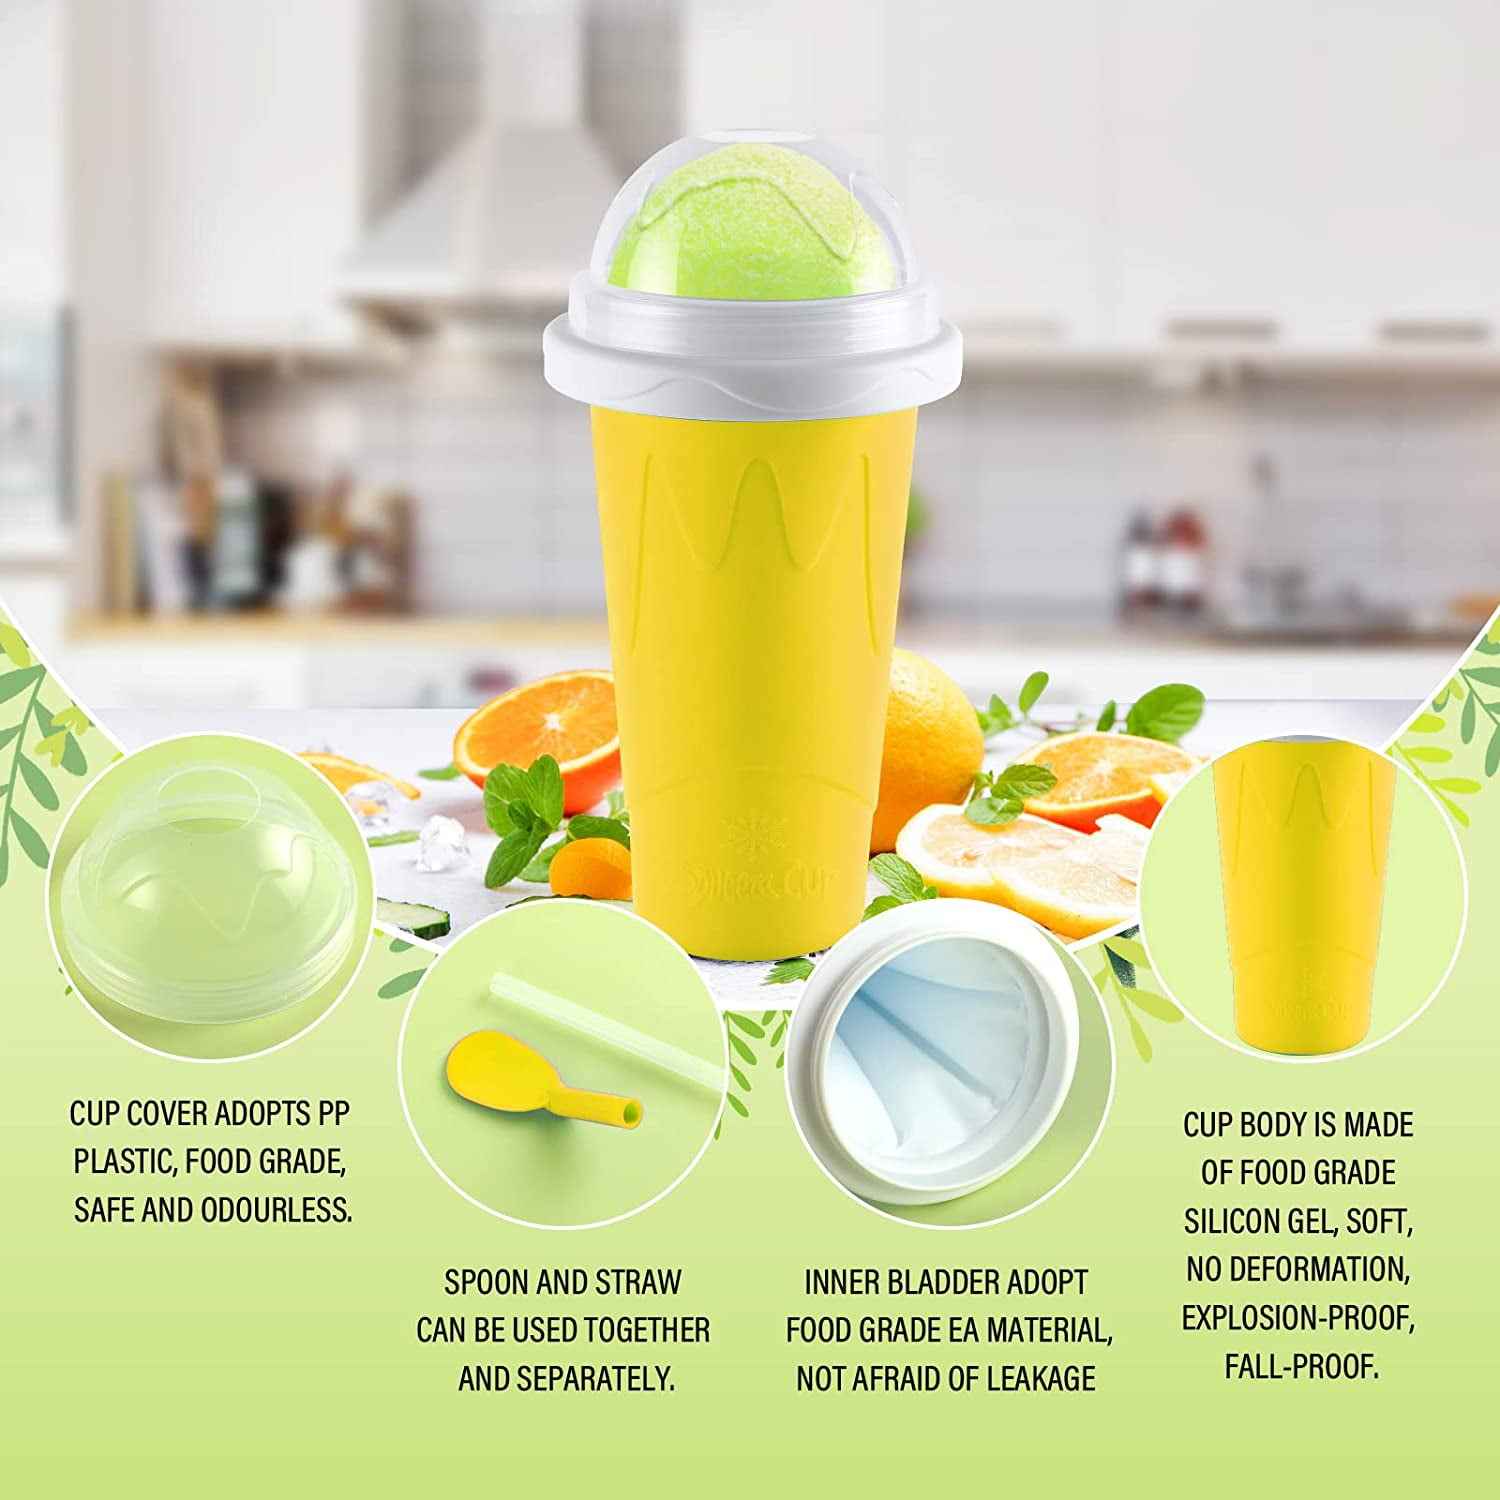 Slushy Maker Cup, Smoothie Pinch Ice Cup, Quick Frozen Smoothie Cups with  Lids, Cooling Cup Squeeze Cup, DIY Homemade Milk Shake Ice Cream Maker  Smoothie Cups for Kids Adults Summer 